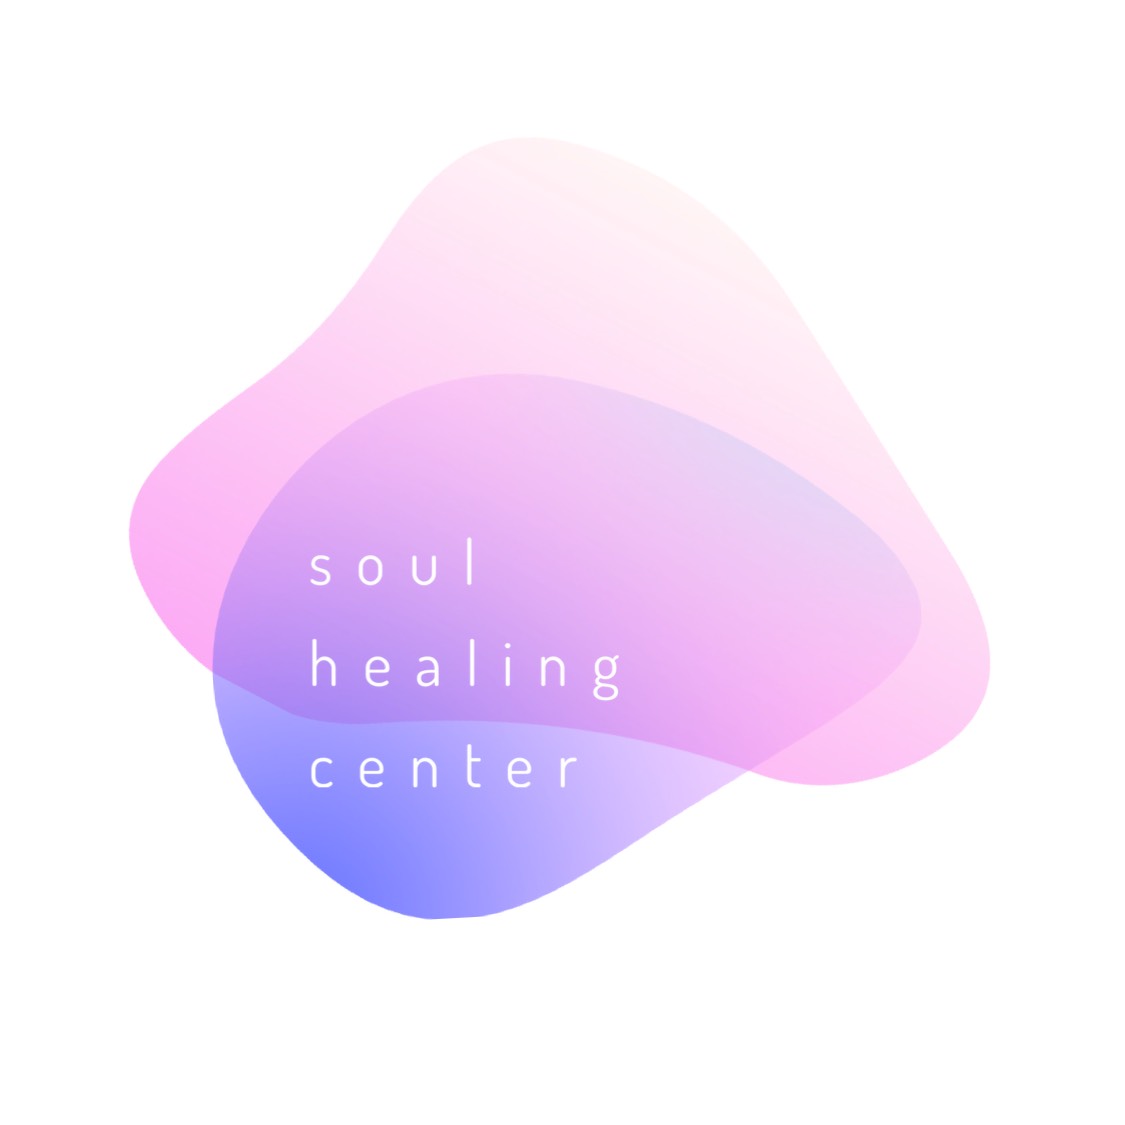 Soul Health Center Abstract Colorful Business Logo Template